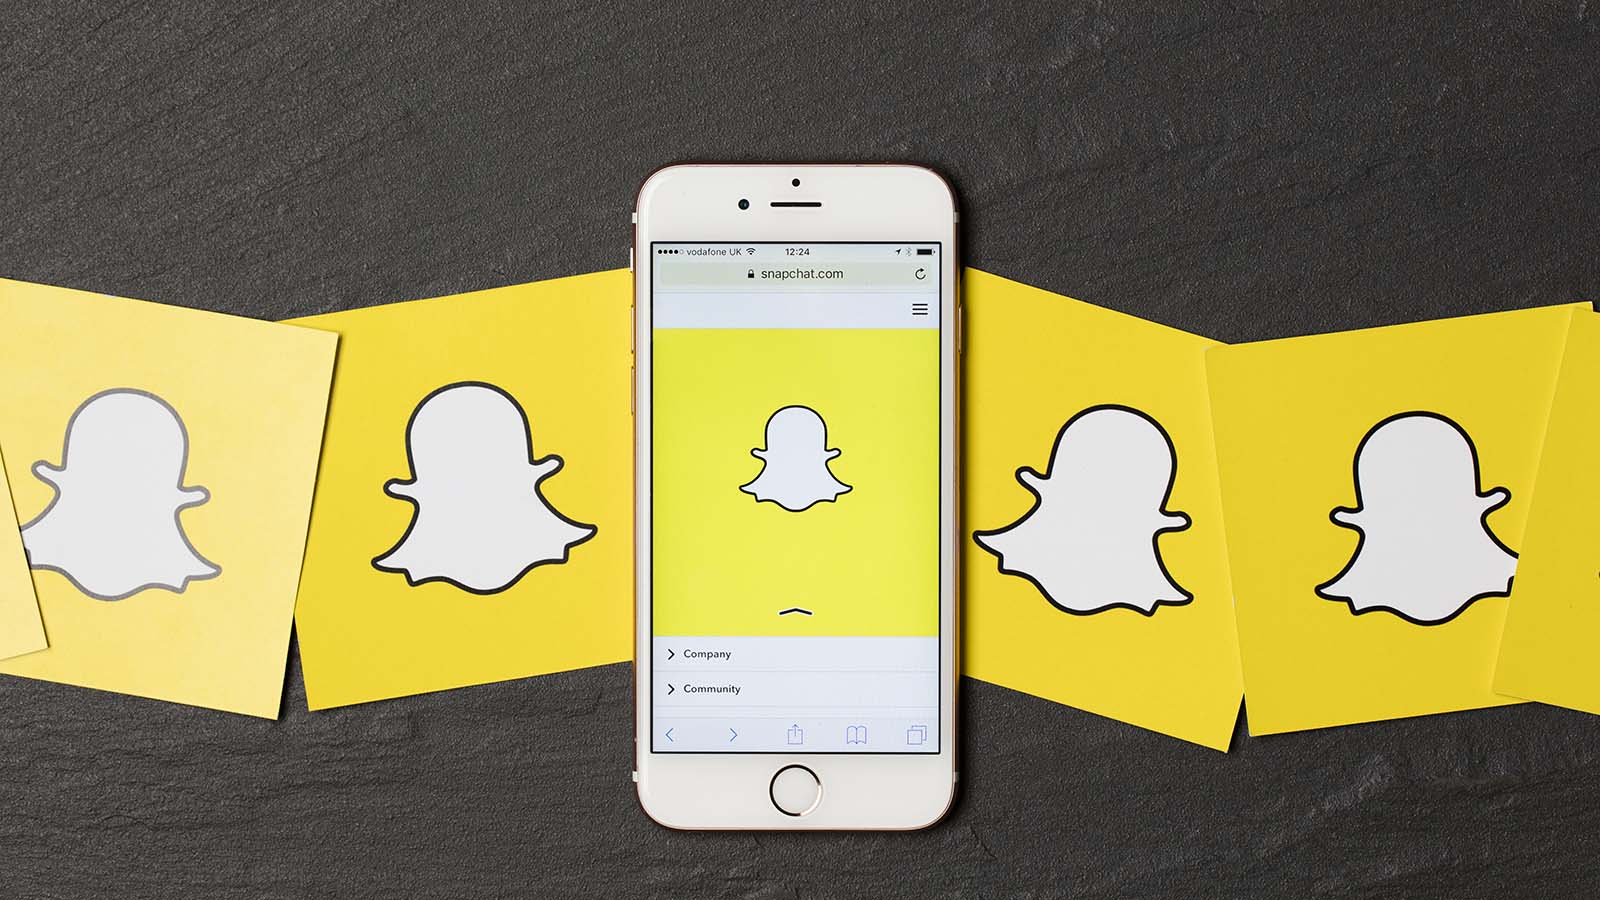 An apple iPhone showing the snapchat (SNAP) application alongside other snapchat logos